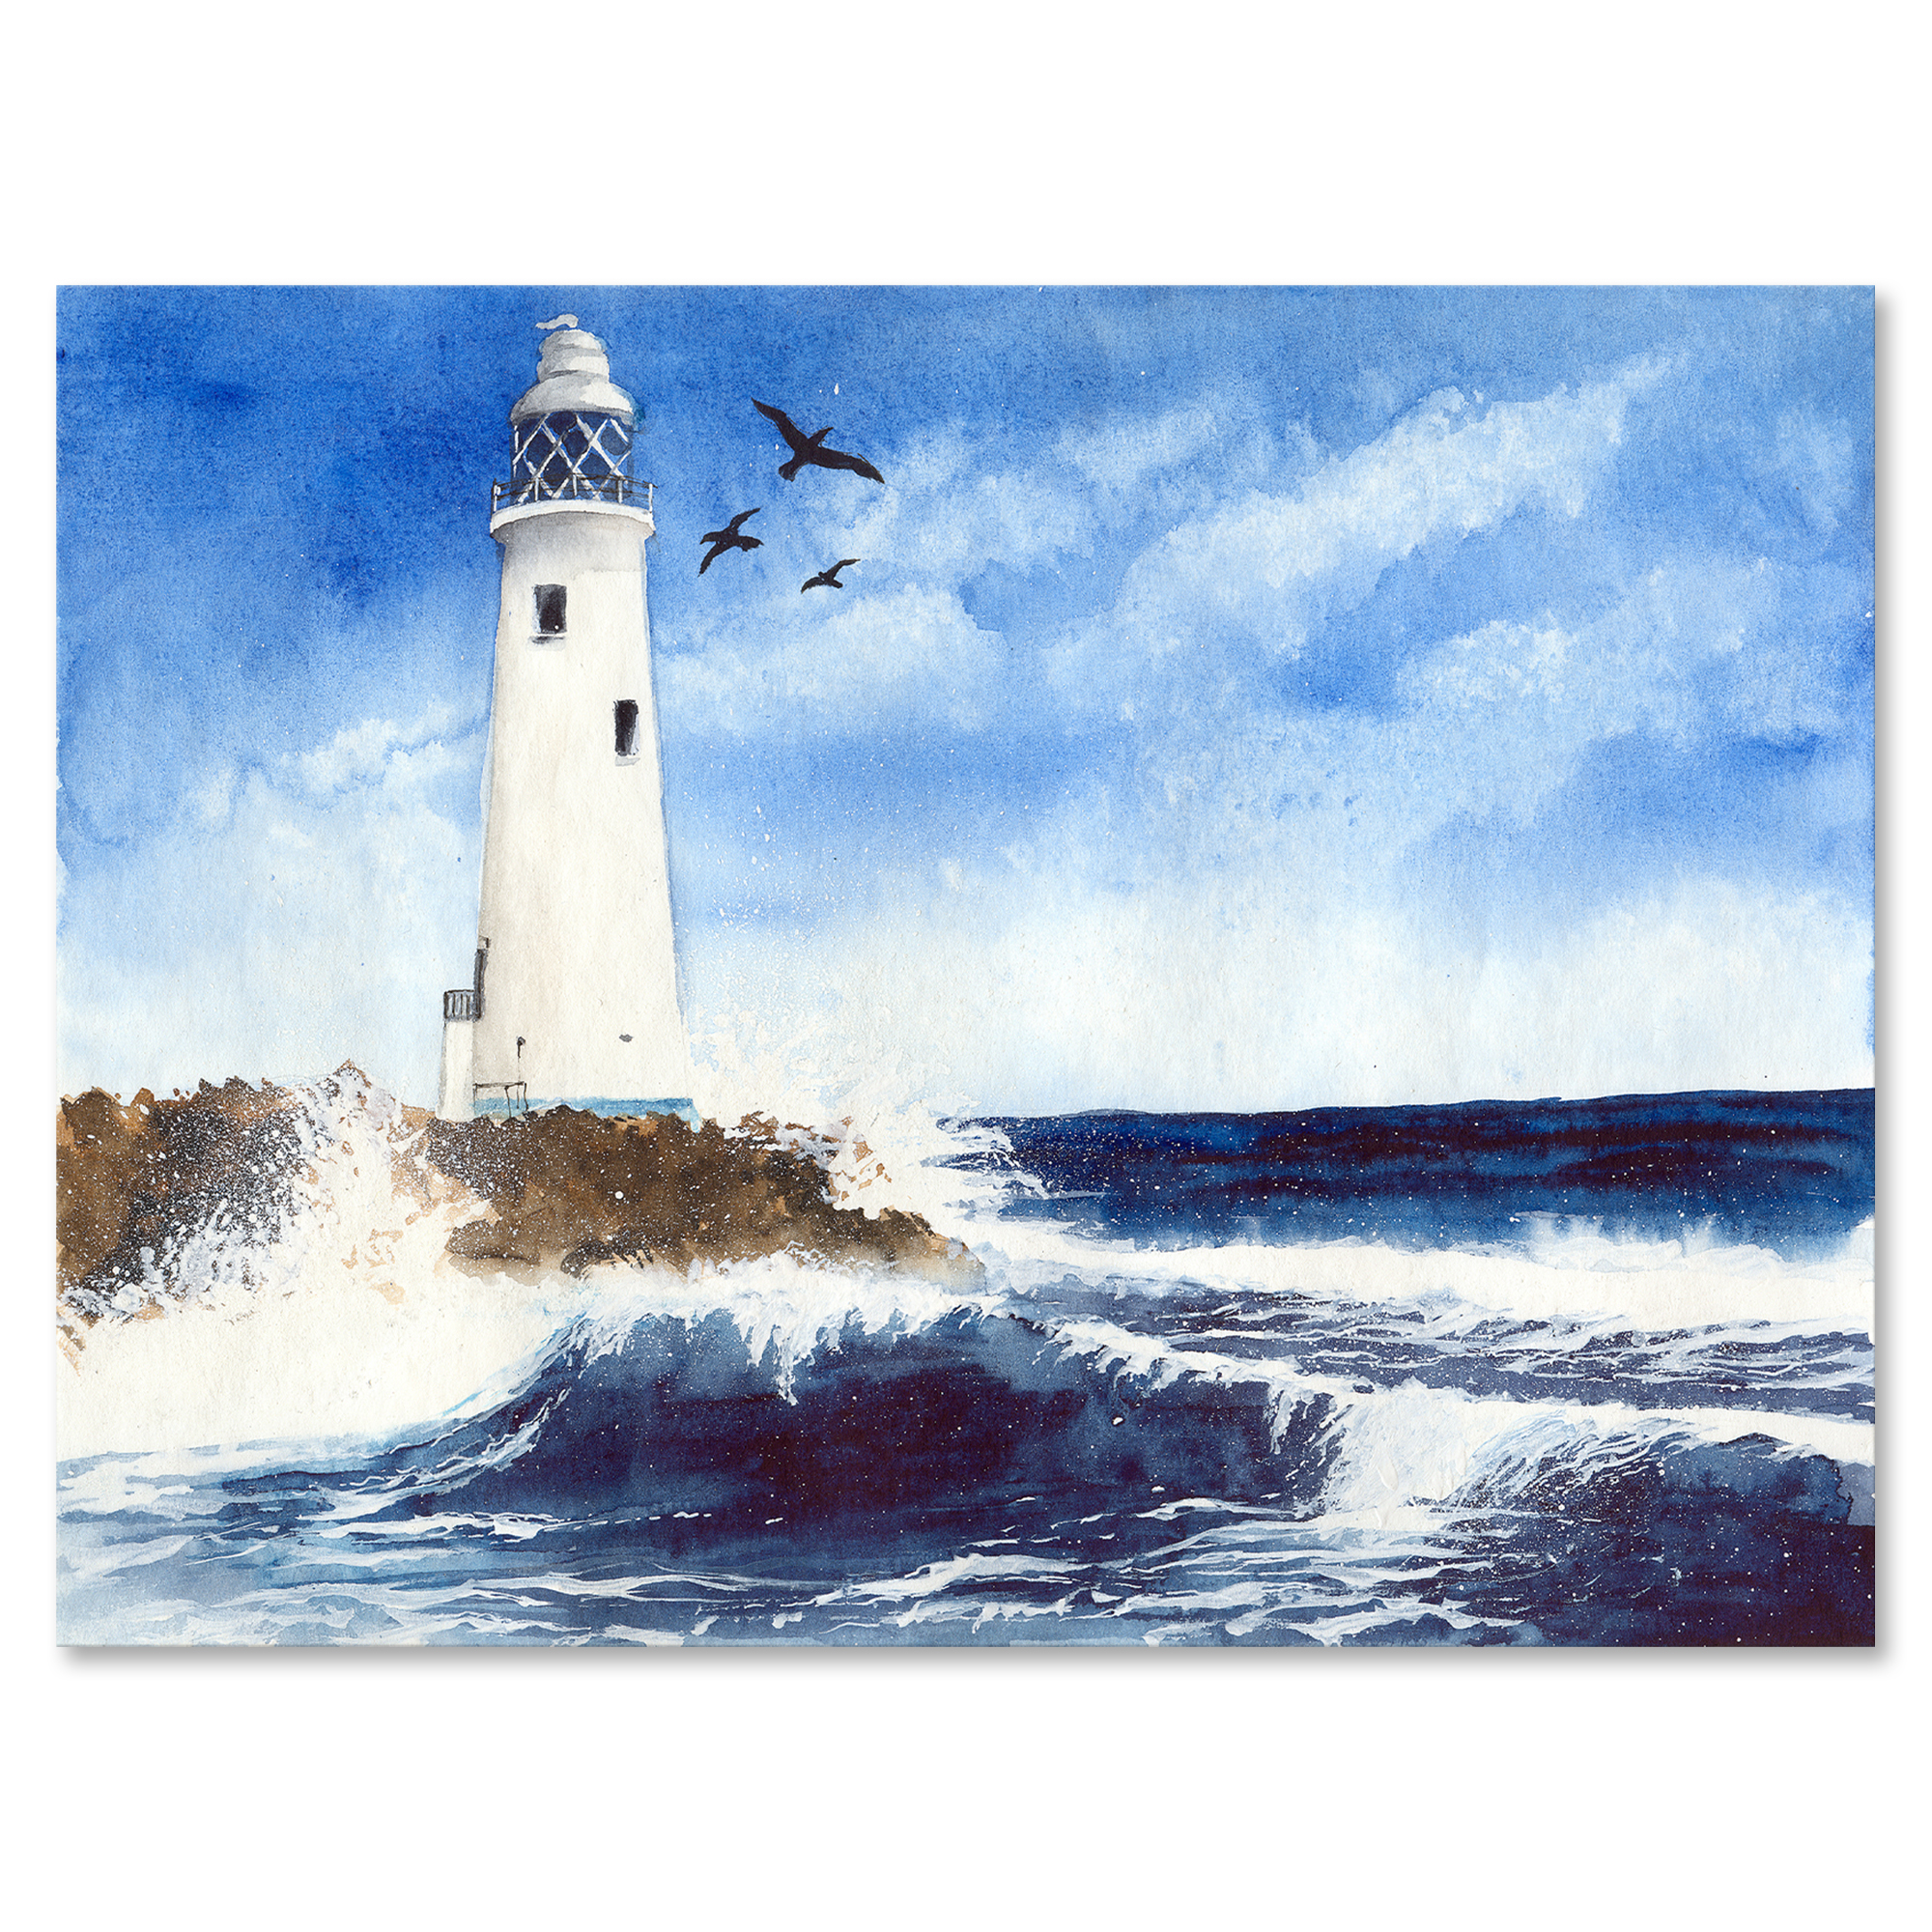 Seagulls With Lighthouse On The Rocky Island 40 in x 30 in Painting Canvas Art Print, by Designart - image 1 of 4